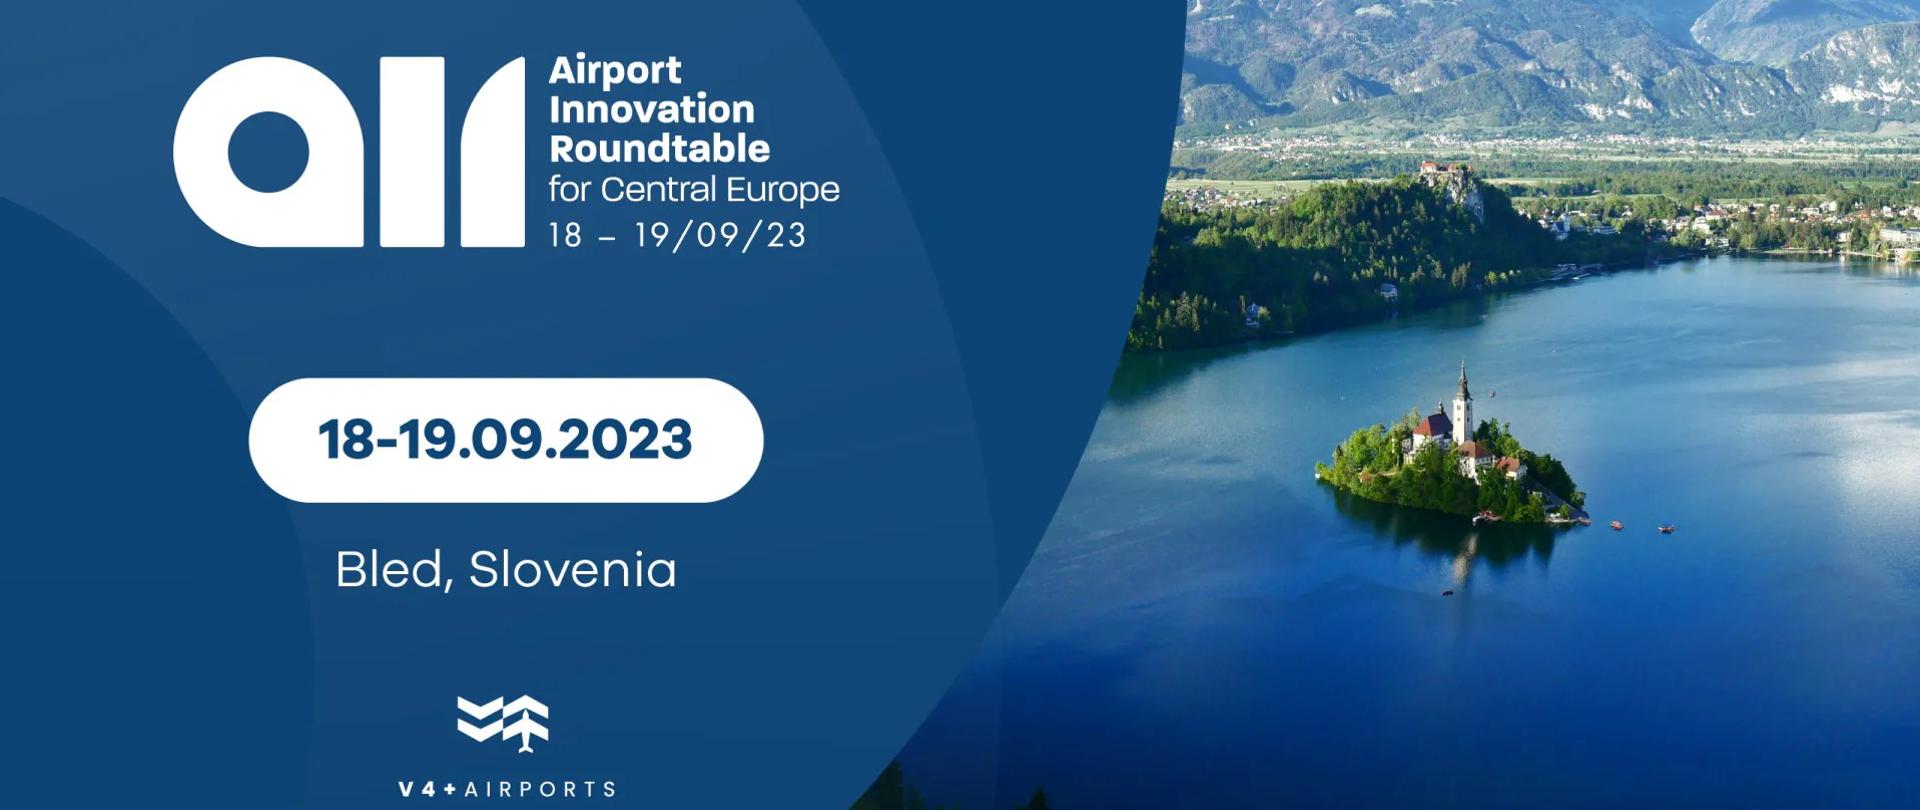 Konferencja V4 + AIRPORTS - Airport Innovation Roundtable for Central Europe – AIR2023 w Bledzie